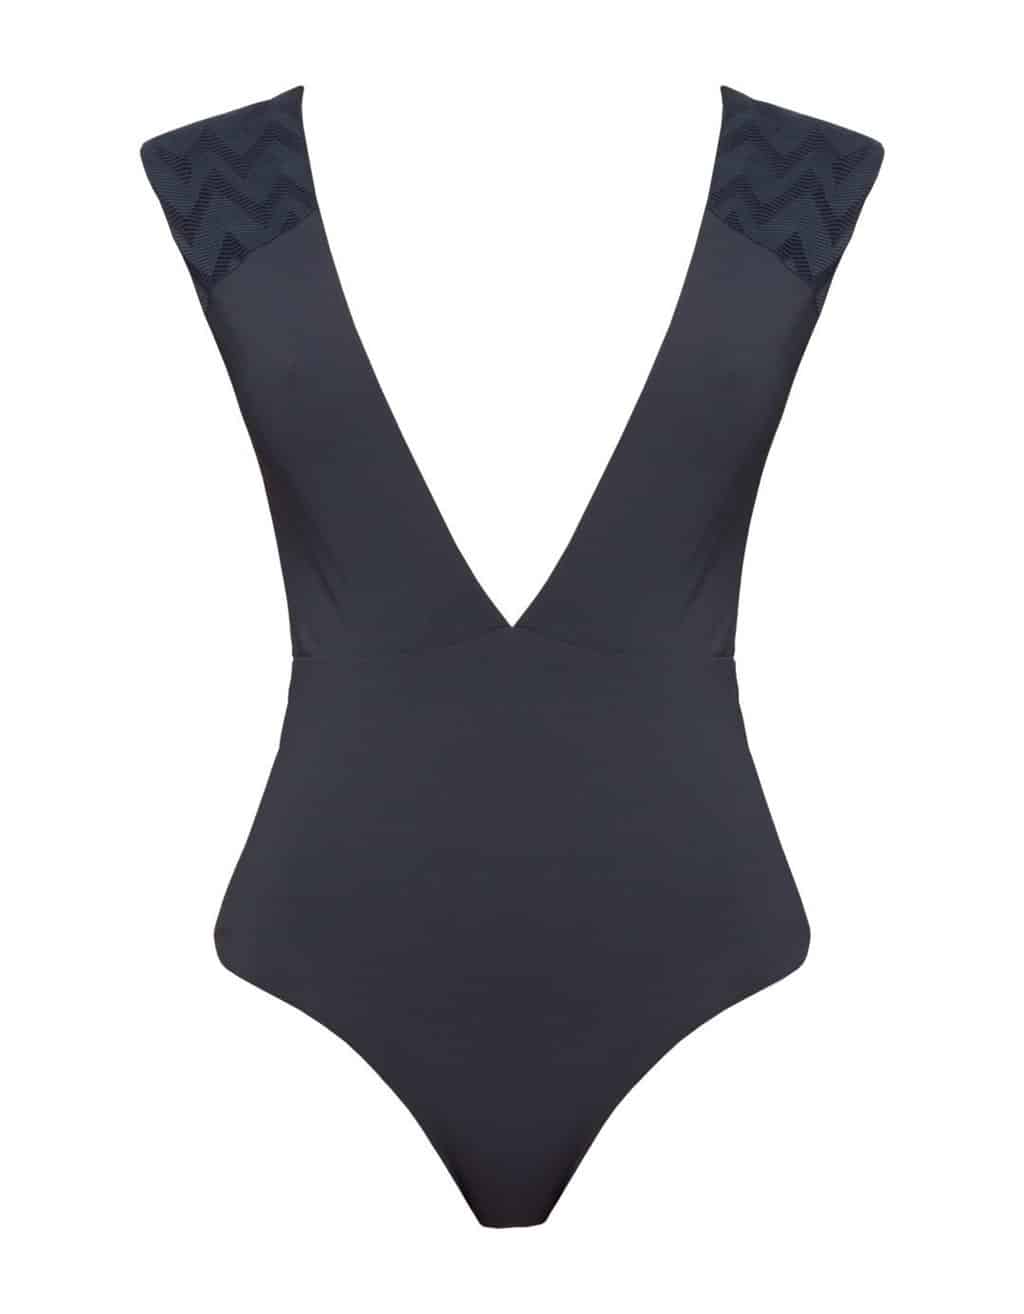 American Made Swimsuits for Women: A USA Love List Source Guide • USA ...